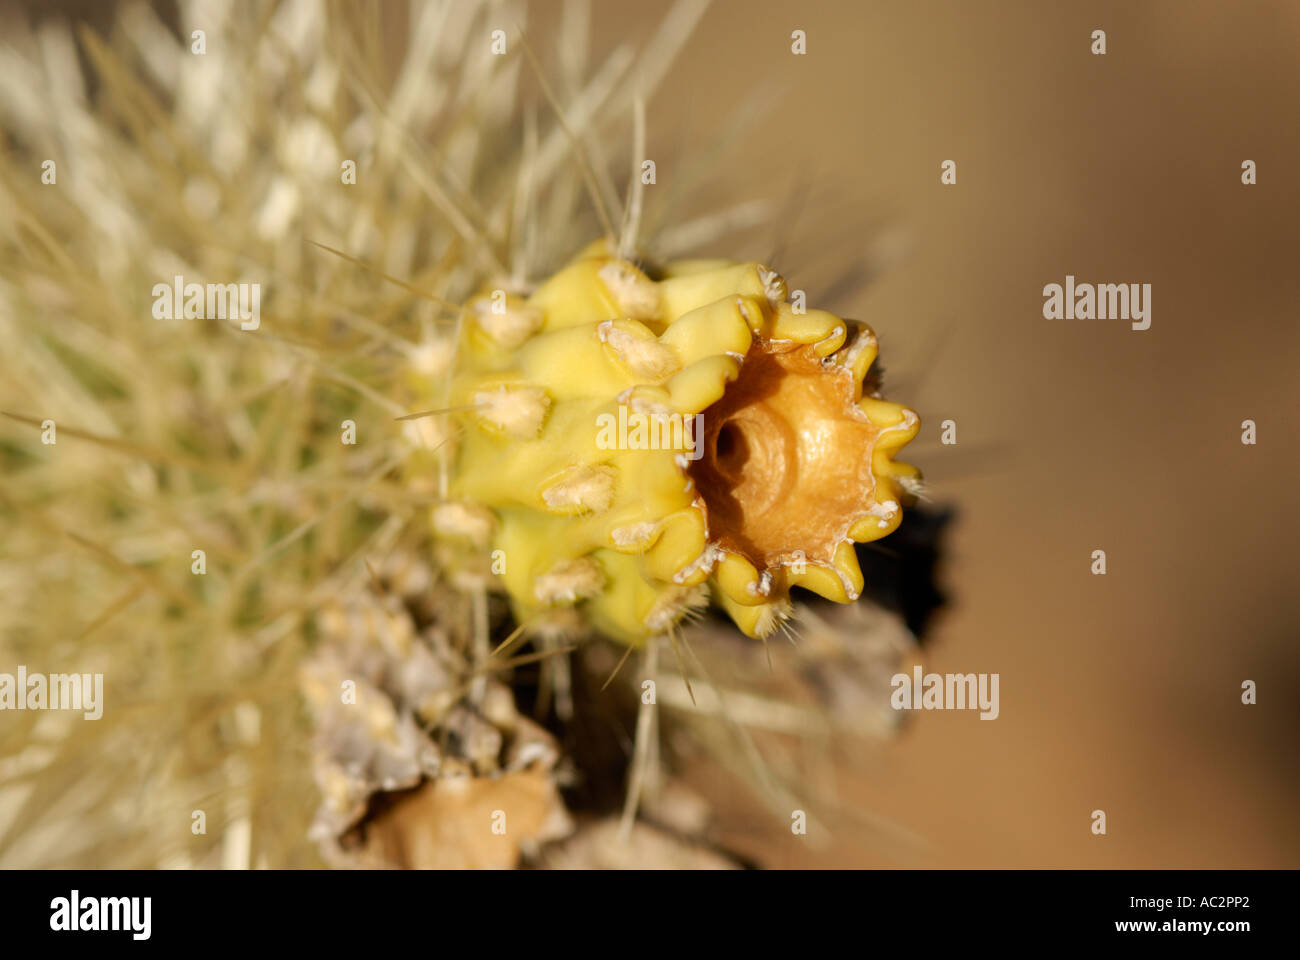 Cholla cactus, Opuntia sp., in bloom with close-up of yellow flower, American desert southwest Stock Photo